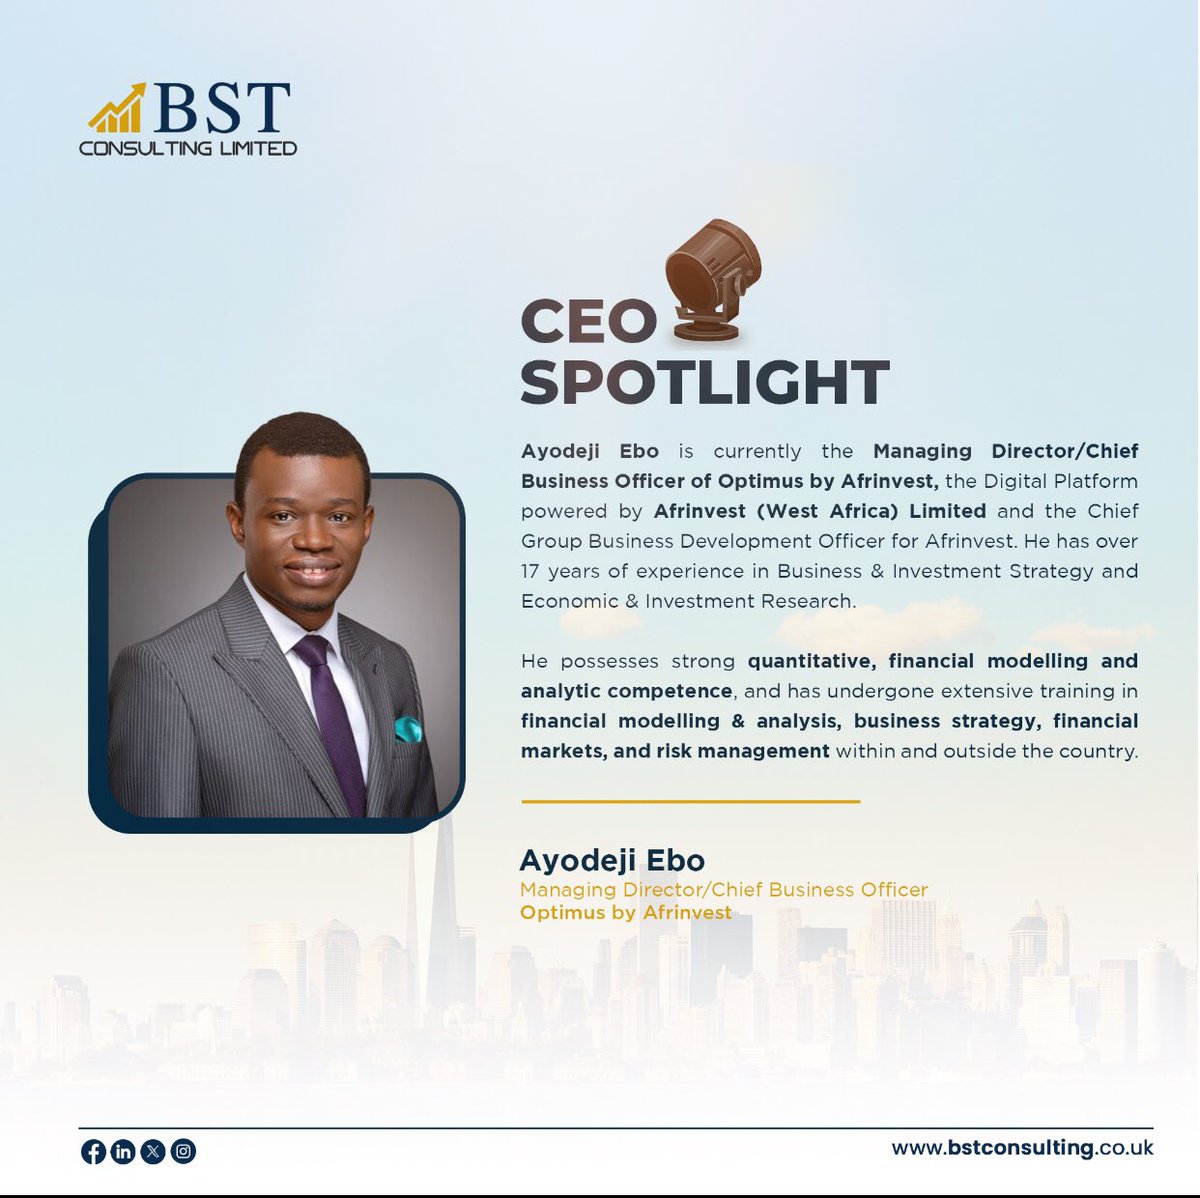 Our CEO spotlight for the week @eboayodeji  @getfinanceandinvestmenttips 

Ayodeji Ebo believes no one should be left out on the journey to a financially secure future. 

#bstconsultinglimited #ceospotlight #financialindustry #finance #business #consulting #advisory #leadership